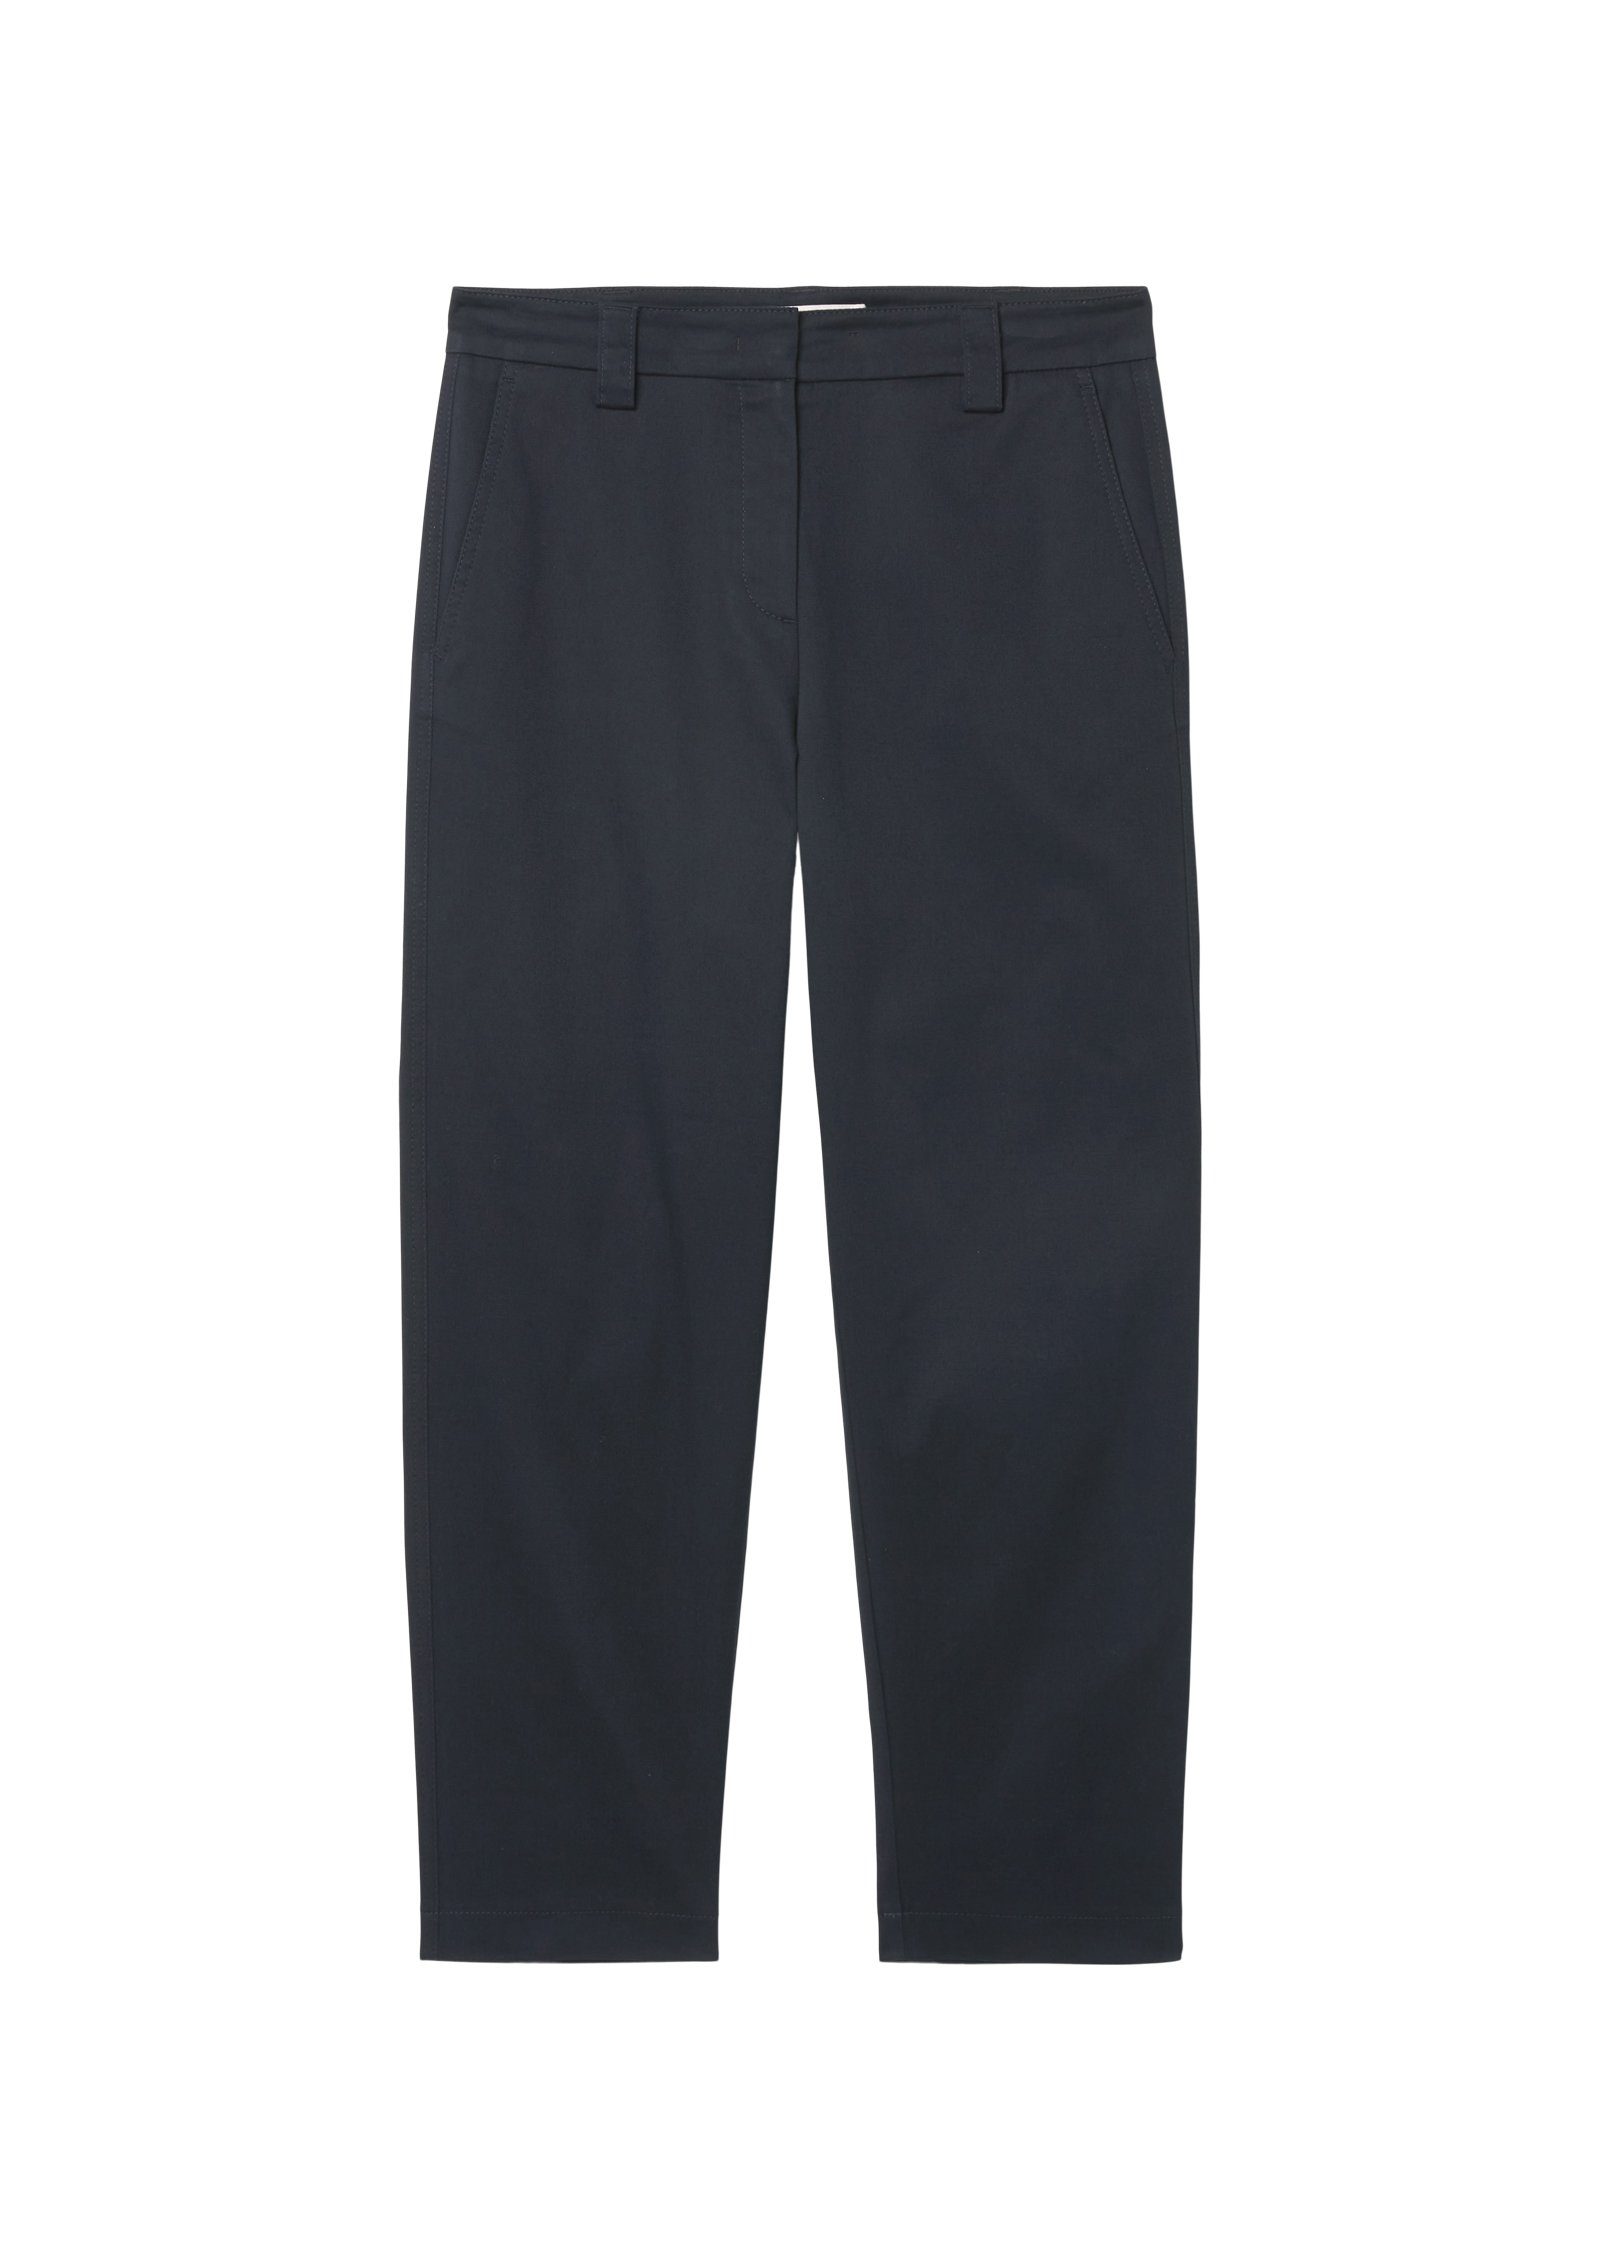 Marc O'Polo 7/8-Hose Pants, modern chino style, welt leg, rise, high tapered Chino-Style blue im modernen thunder pocket